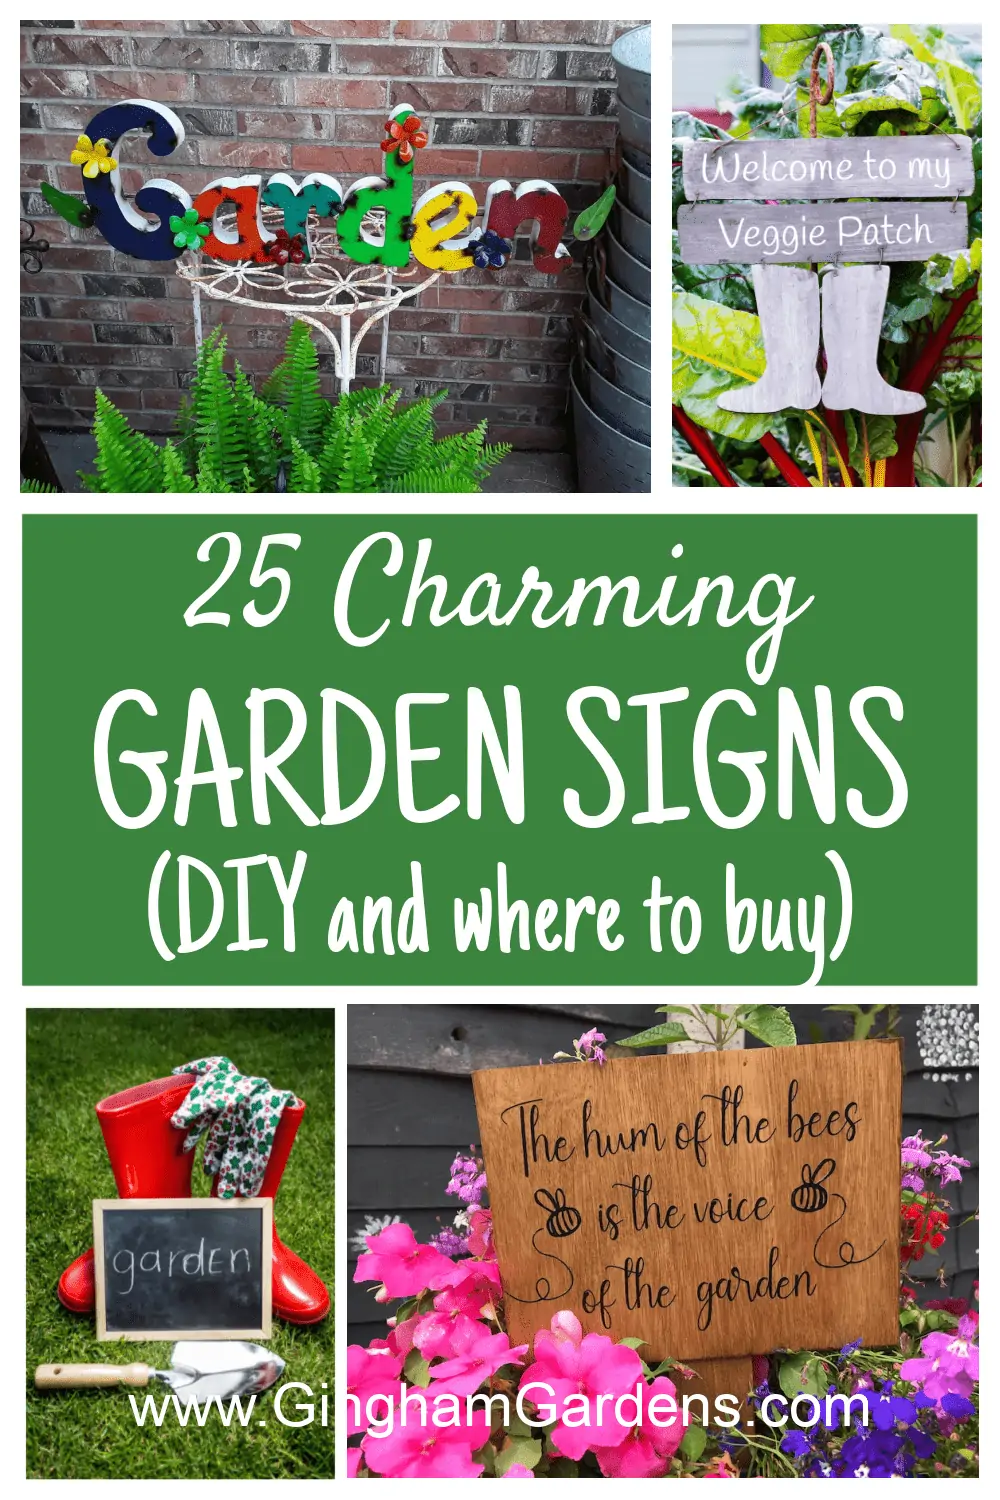 Images of garden signs with text overlay - 25 Charming Garden Signs (DIY and where to buy)